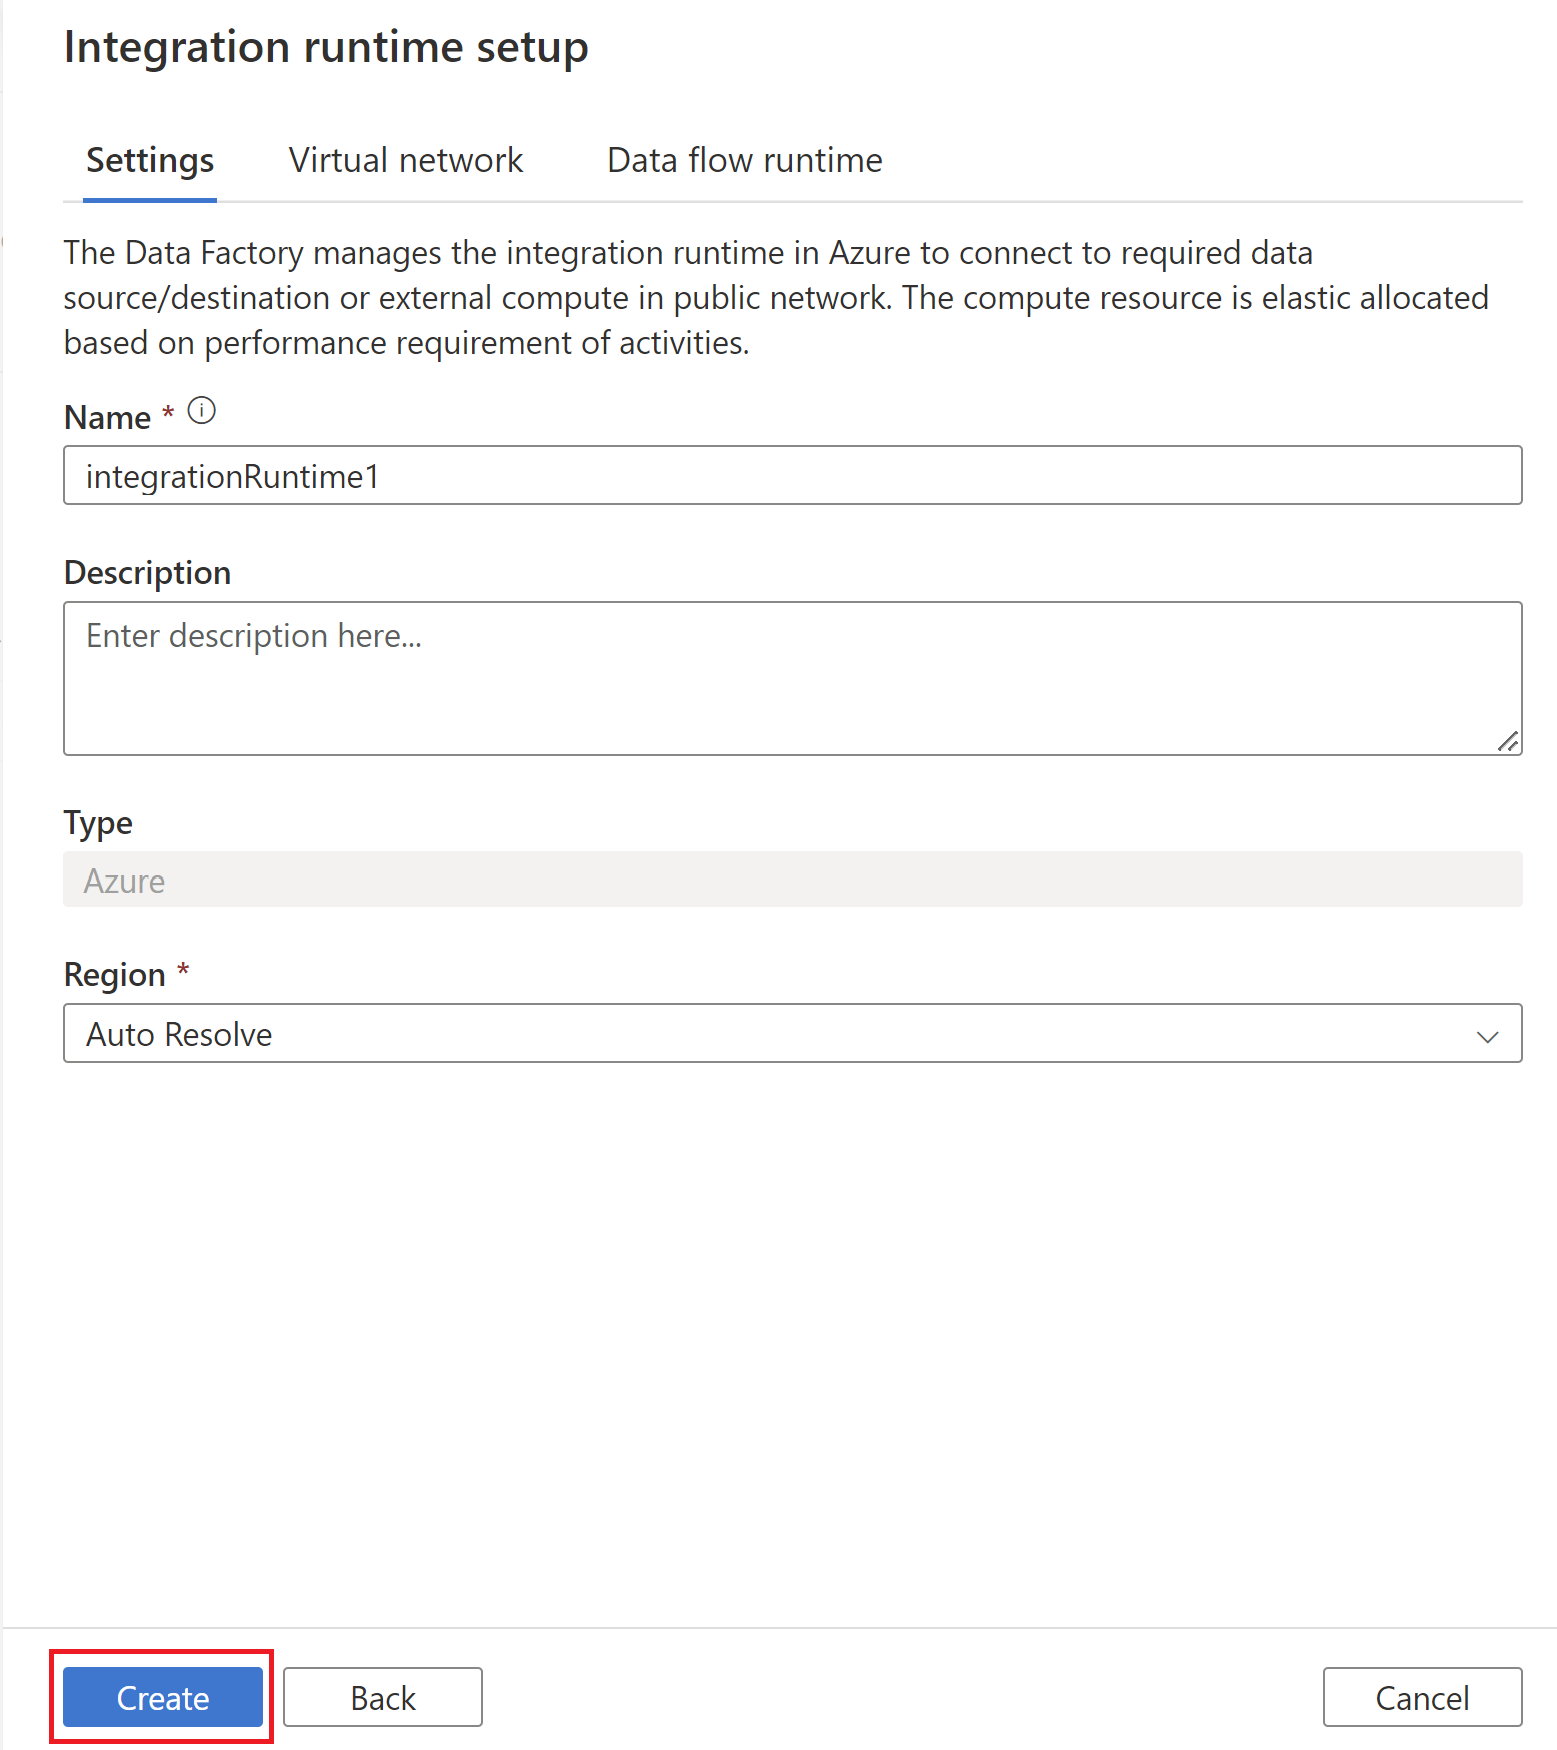 Screenshot that shows the final step to create the Azure integration runtime.